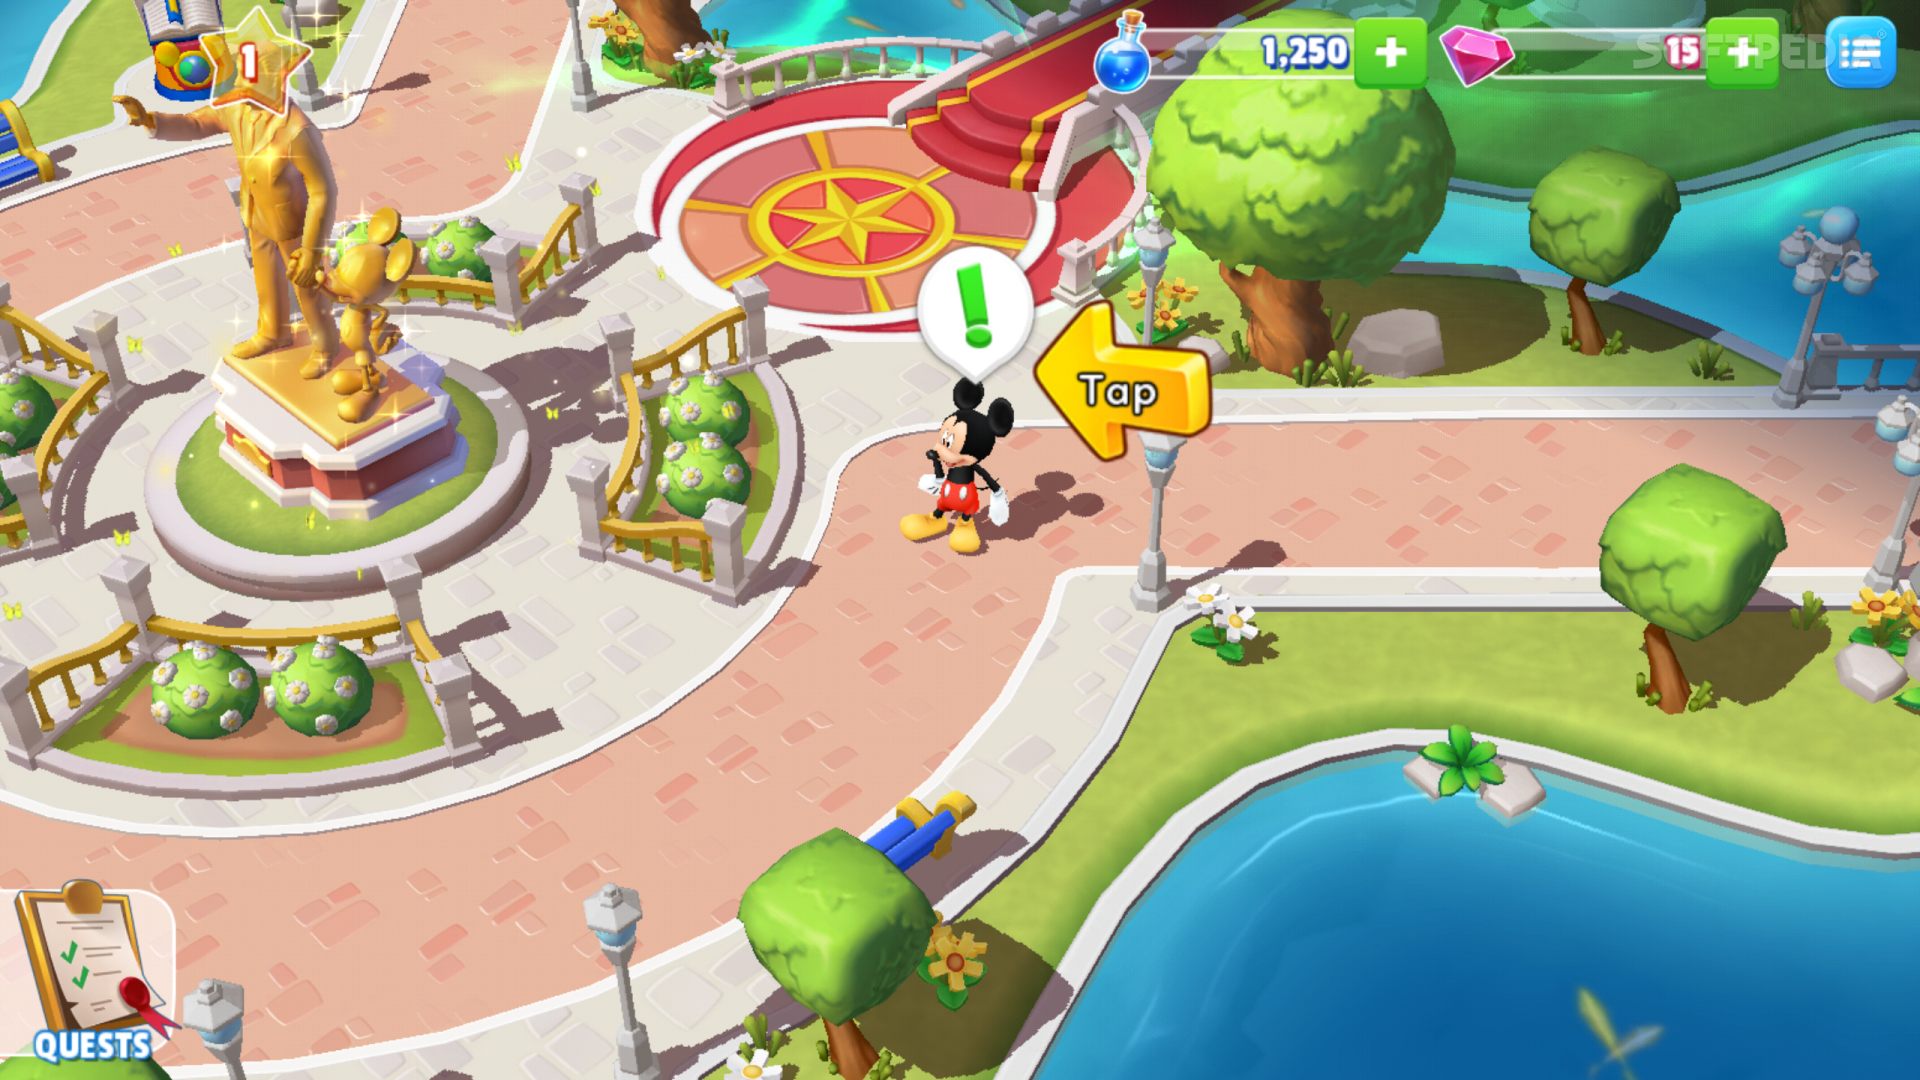 leveling up characters in disney magic kingdoms what time is 16 hours